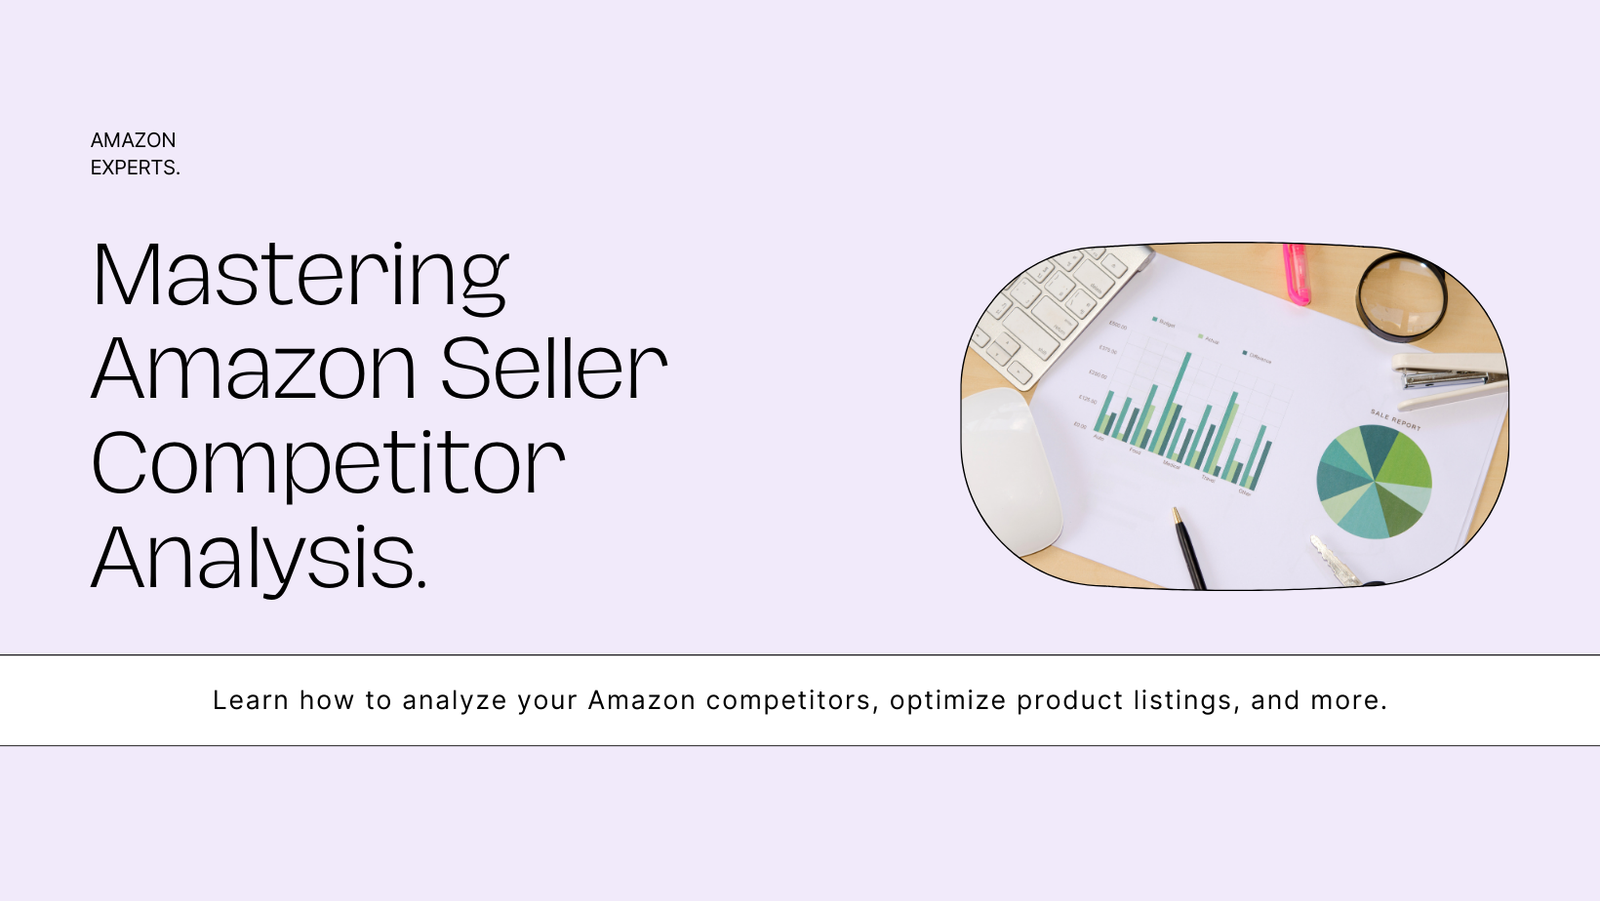 Mastering Amazon Seller Competitor Analysis: Your Step-by-Step Guide